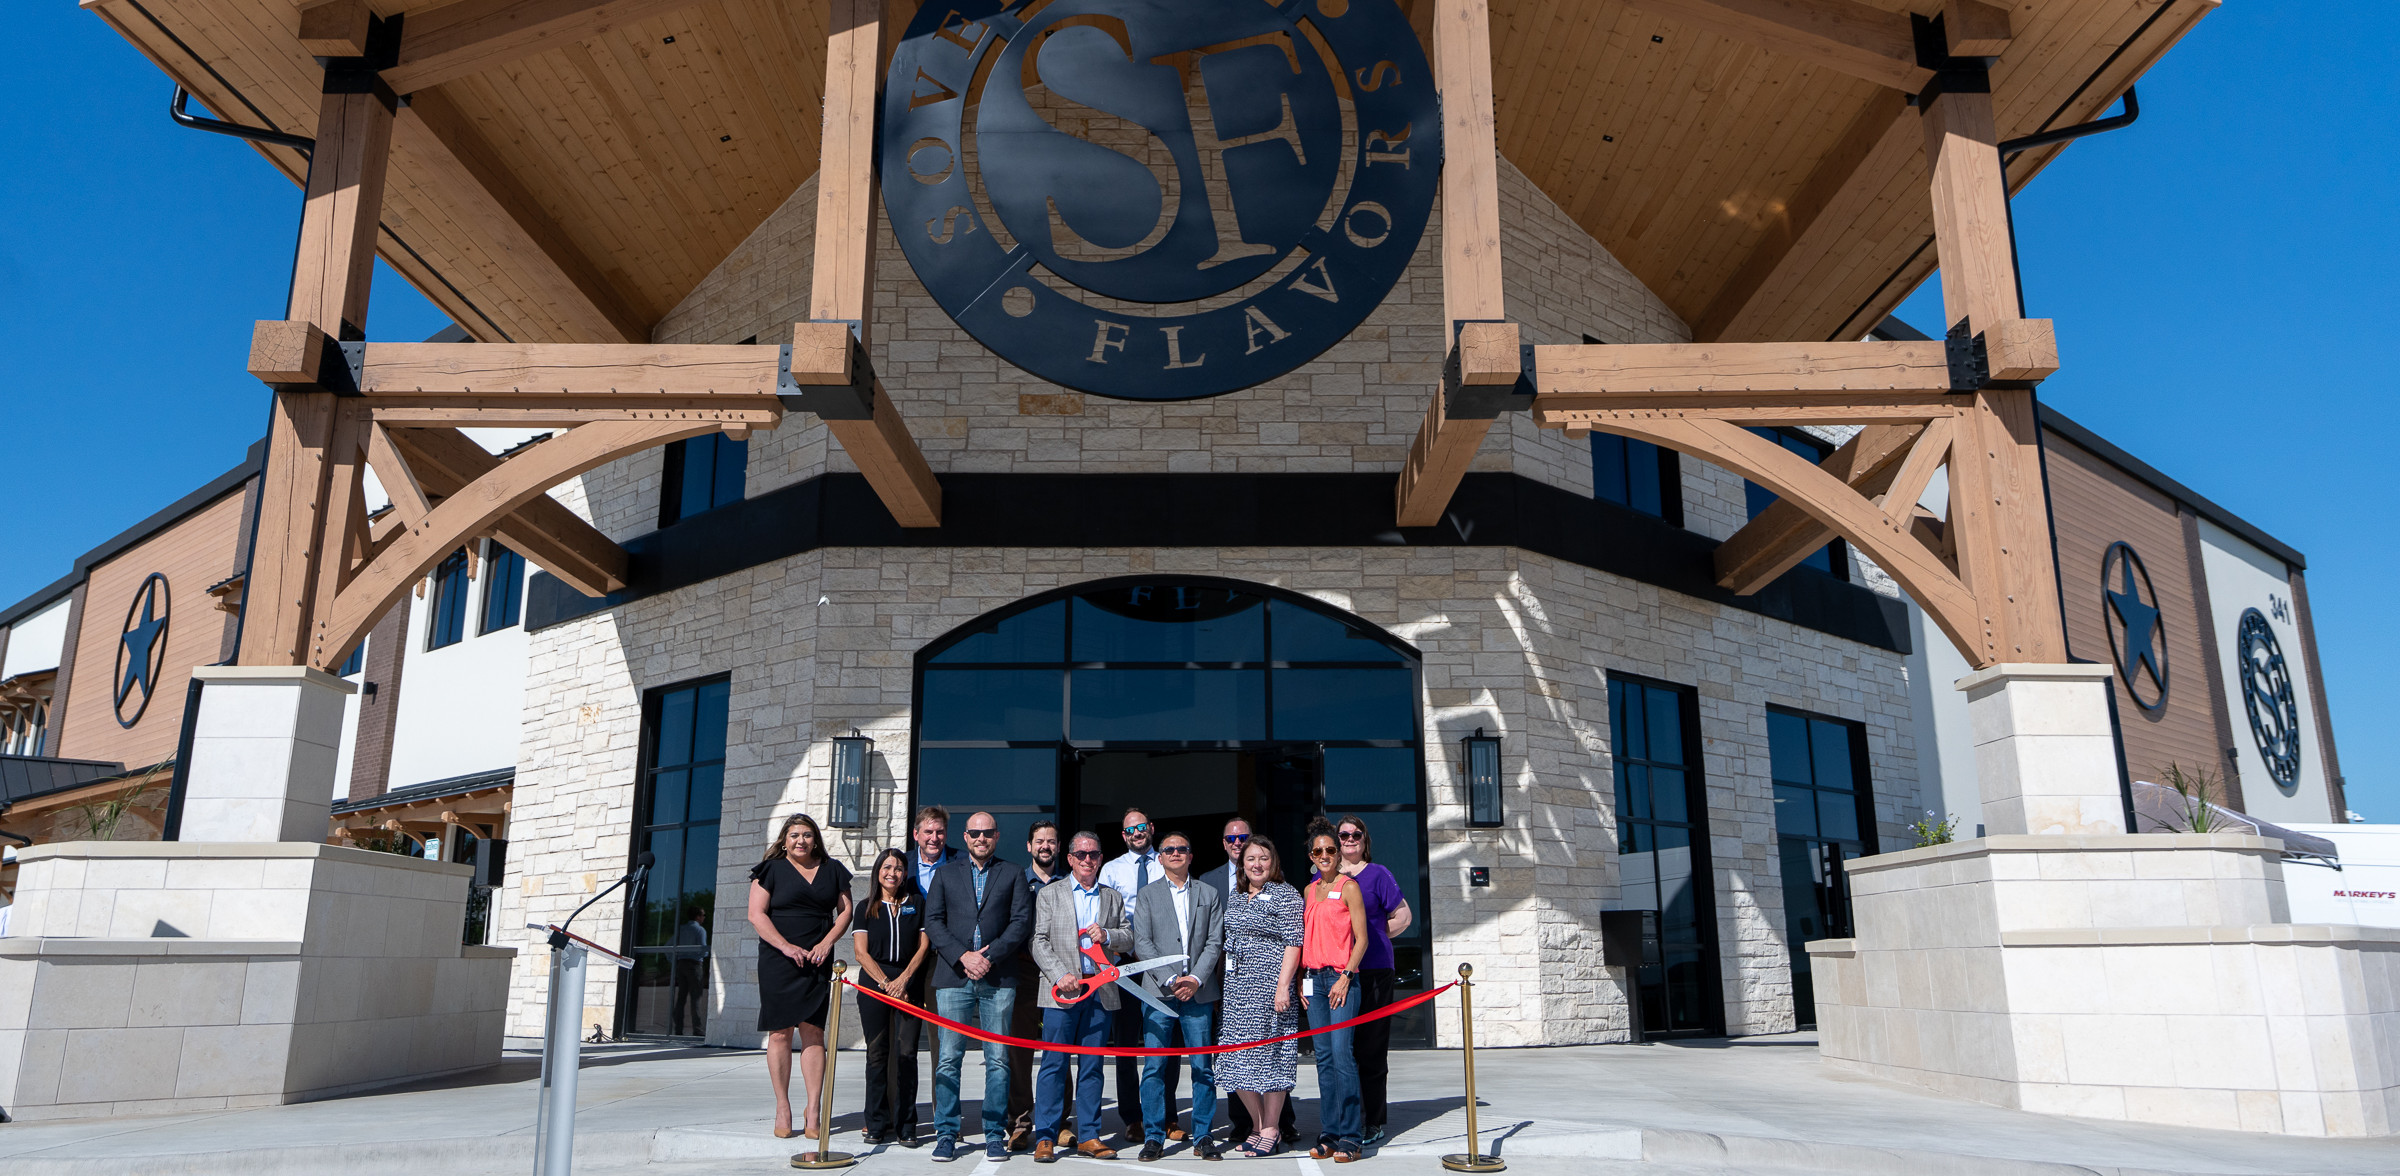 Sovereign Flavors and City of Kyle leadership and staff stand in front of new building with large scissors poised to cut red ribbon.